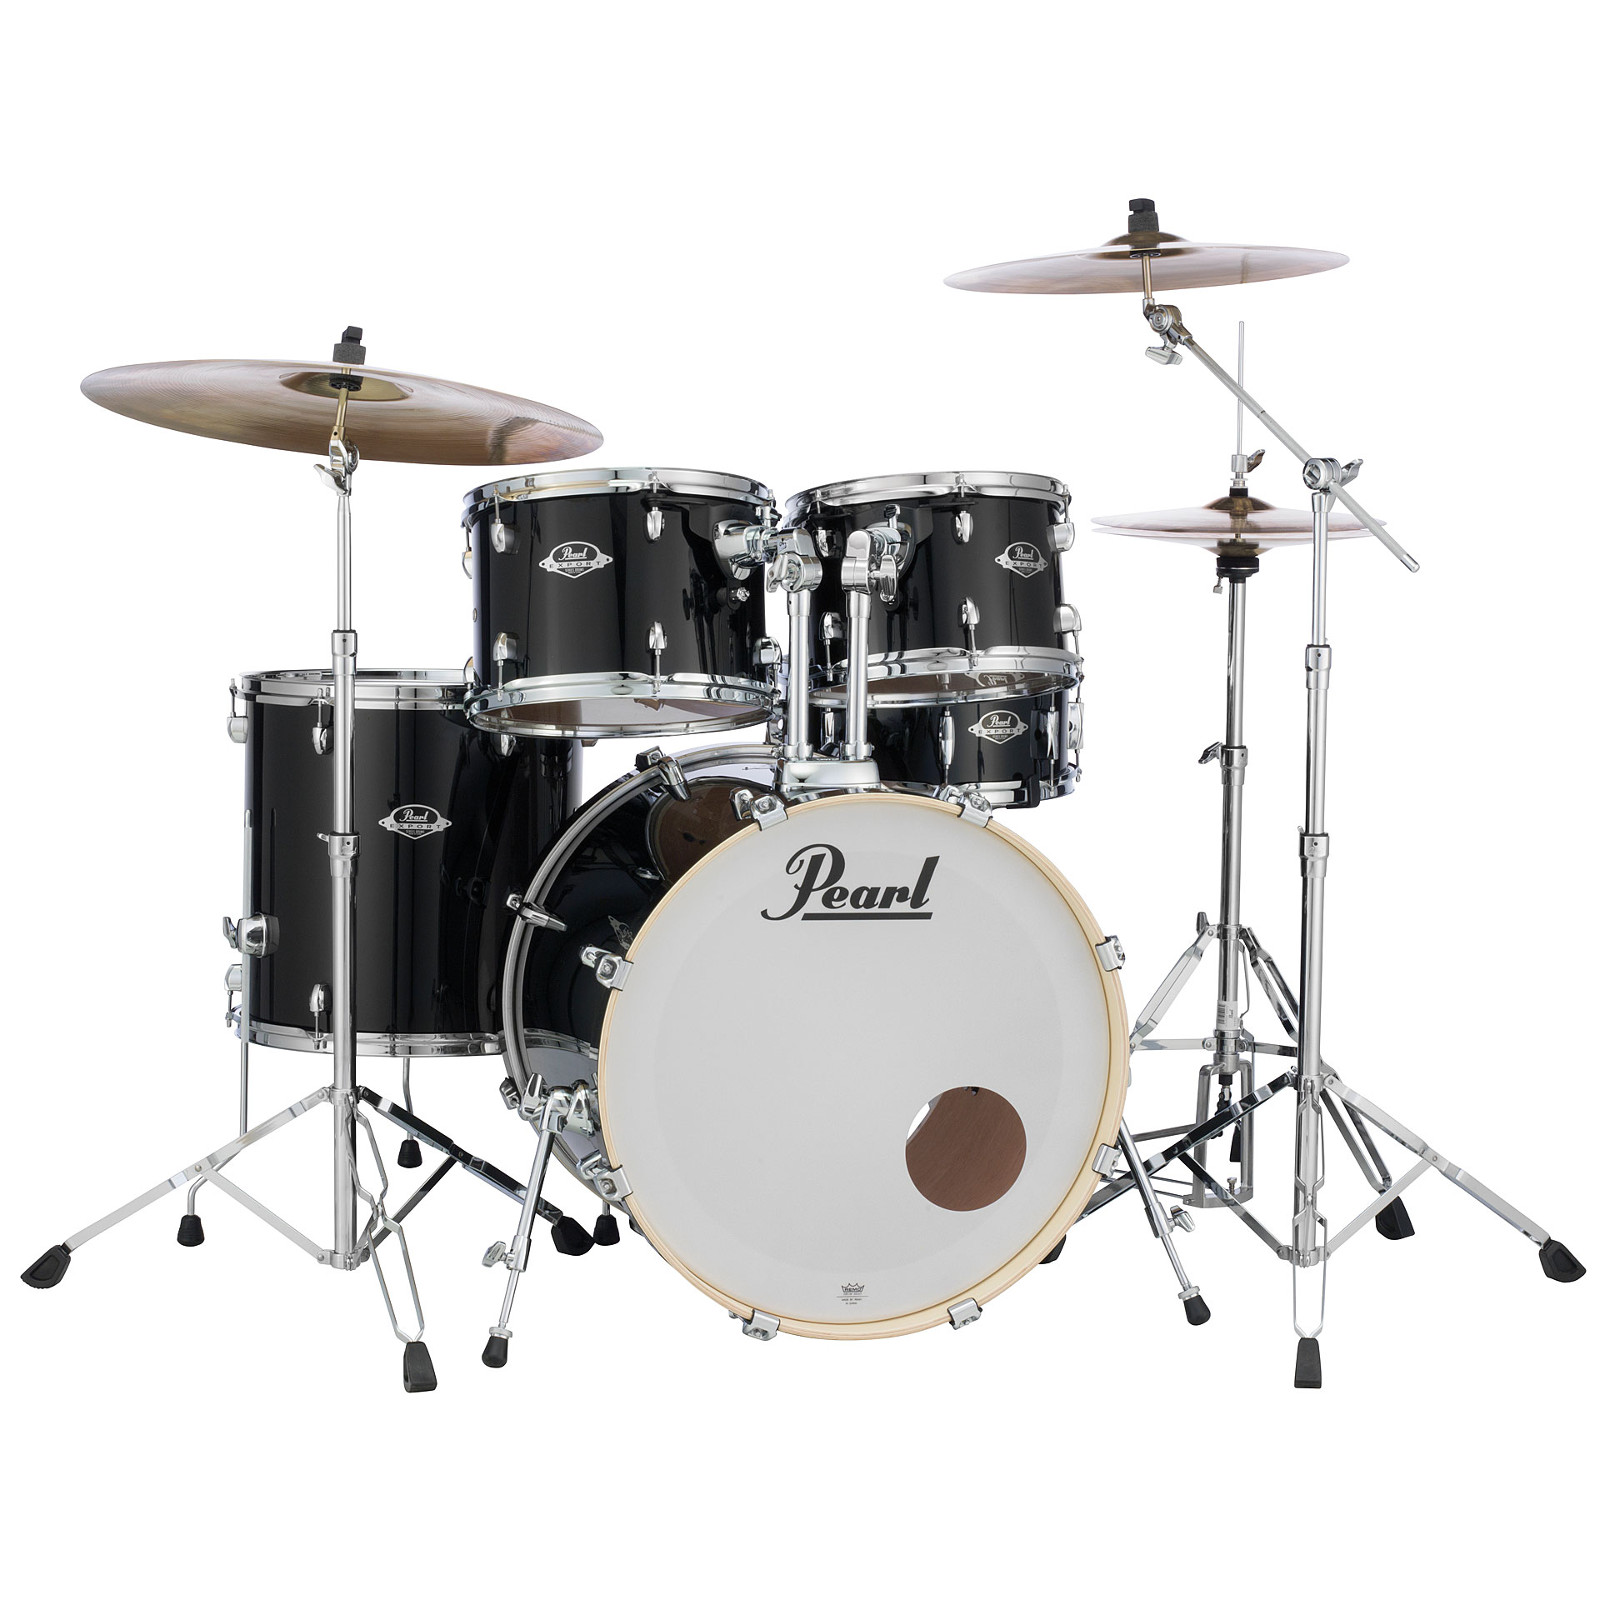 PEARL DRUMS EXPORT FUSION 20 JET BLACK